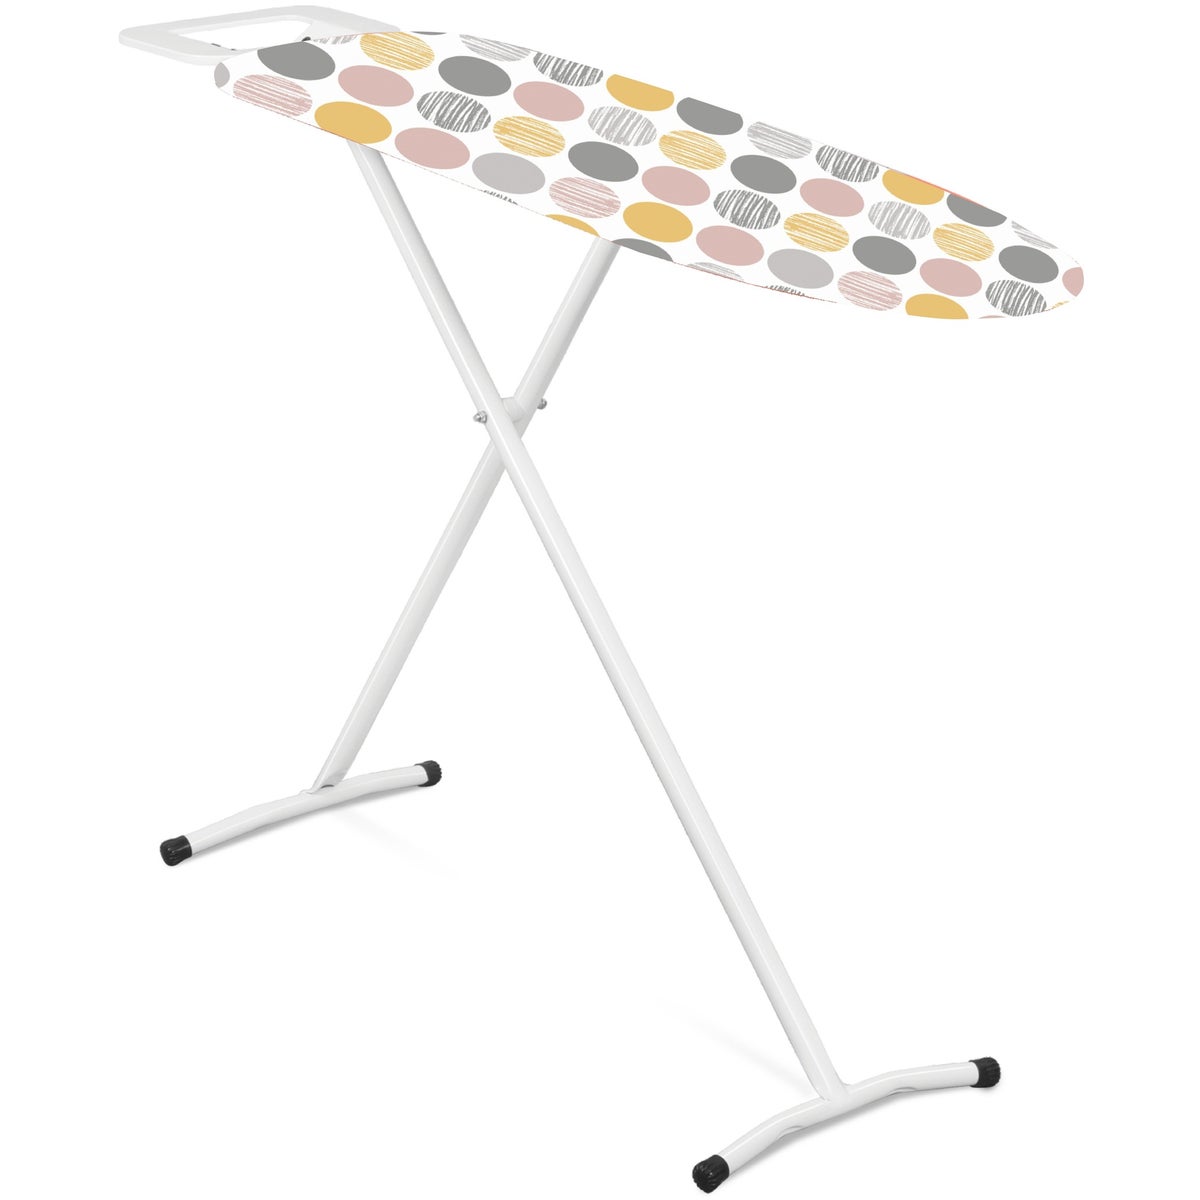 43" x 13" Mesh Ironing Board with Safety Iron Rest & Silicon Dots (4)